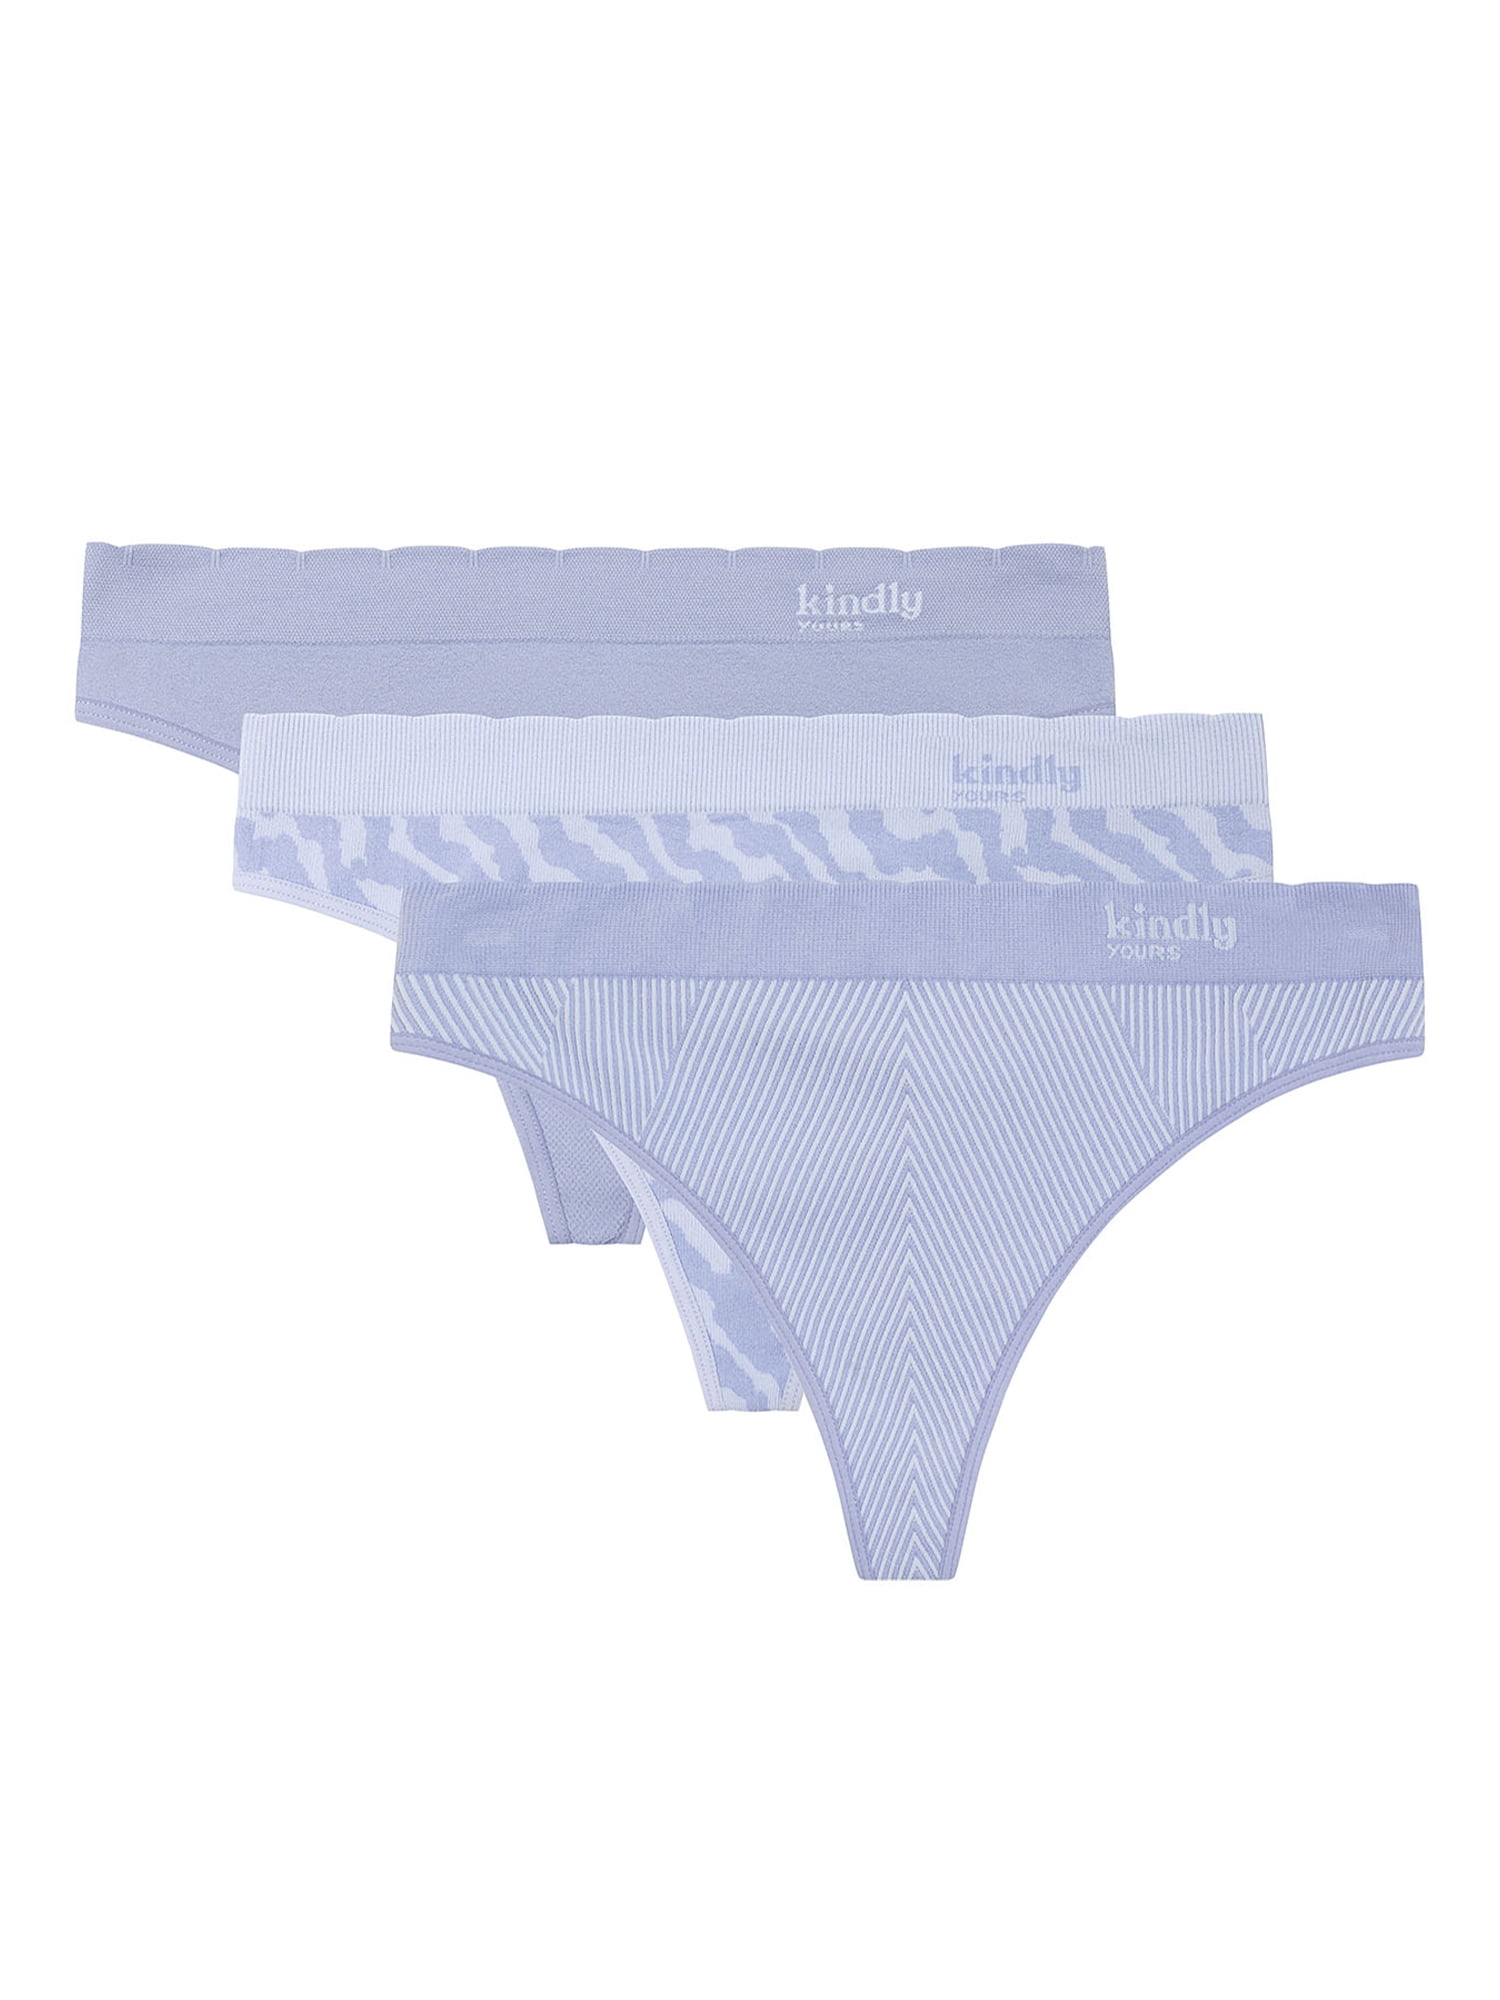 Kindly Yours Women's Sustainable Micro Hi-Cut Panties, 3-Pack